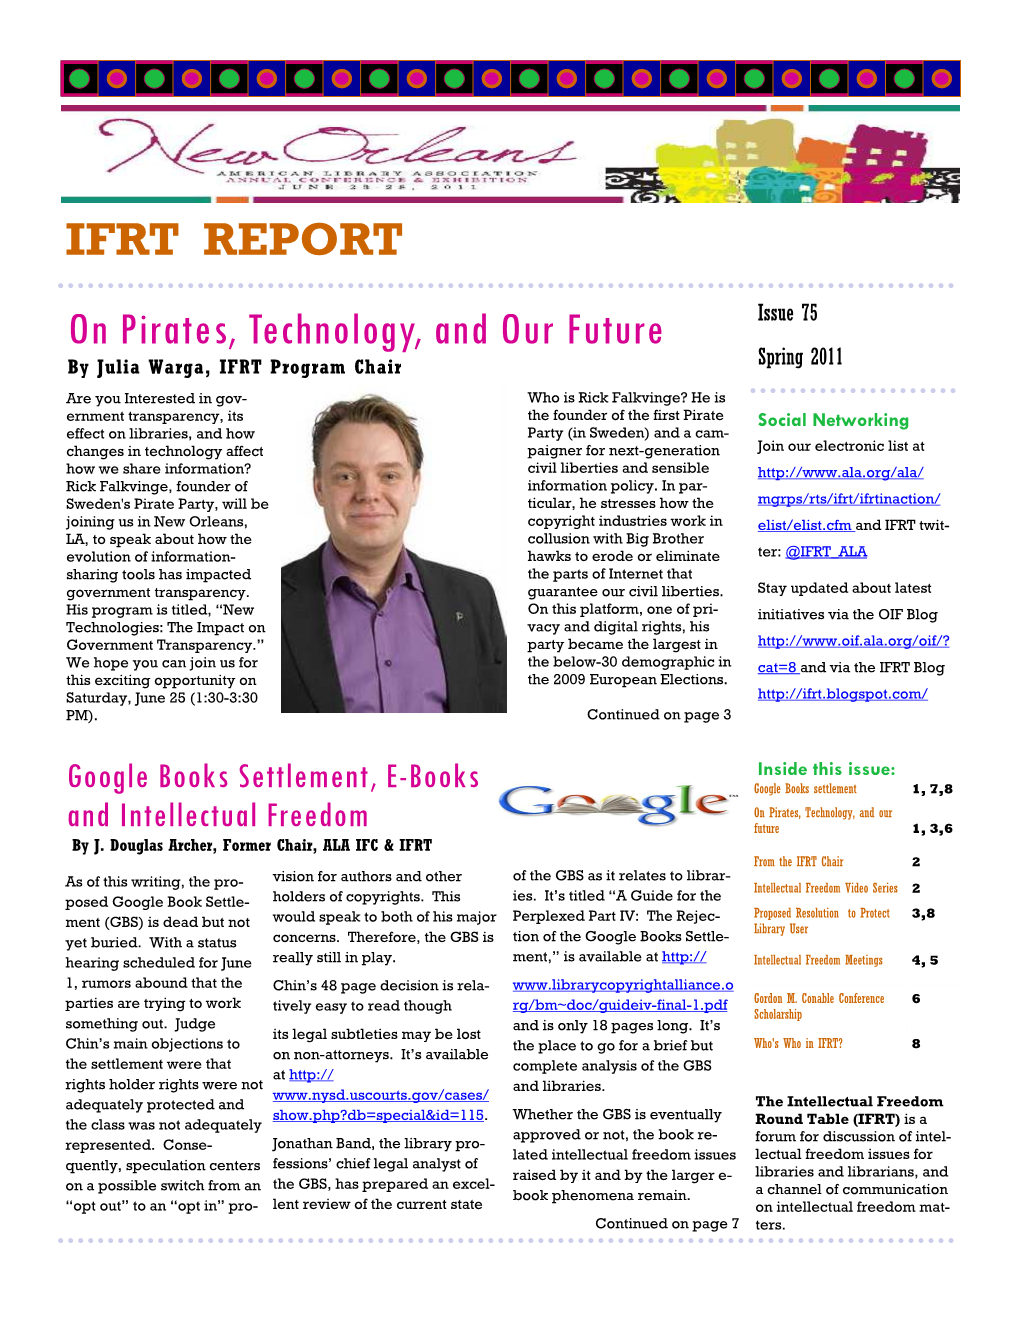 On Pirates, Technology, and Our Future IFRT REPORT